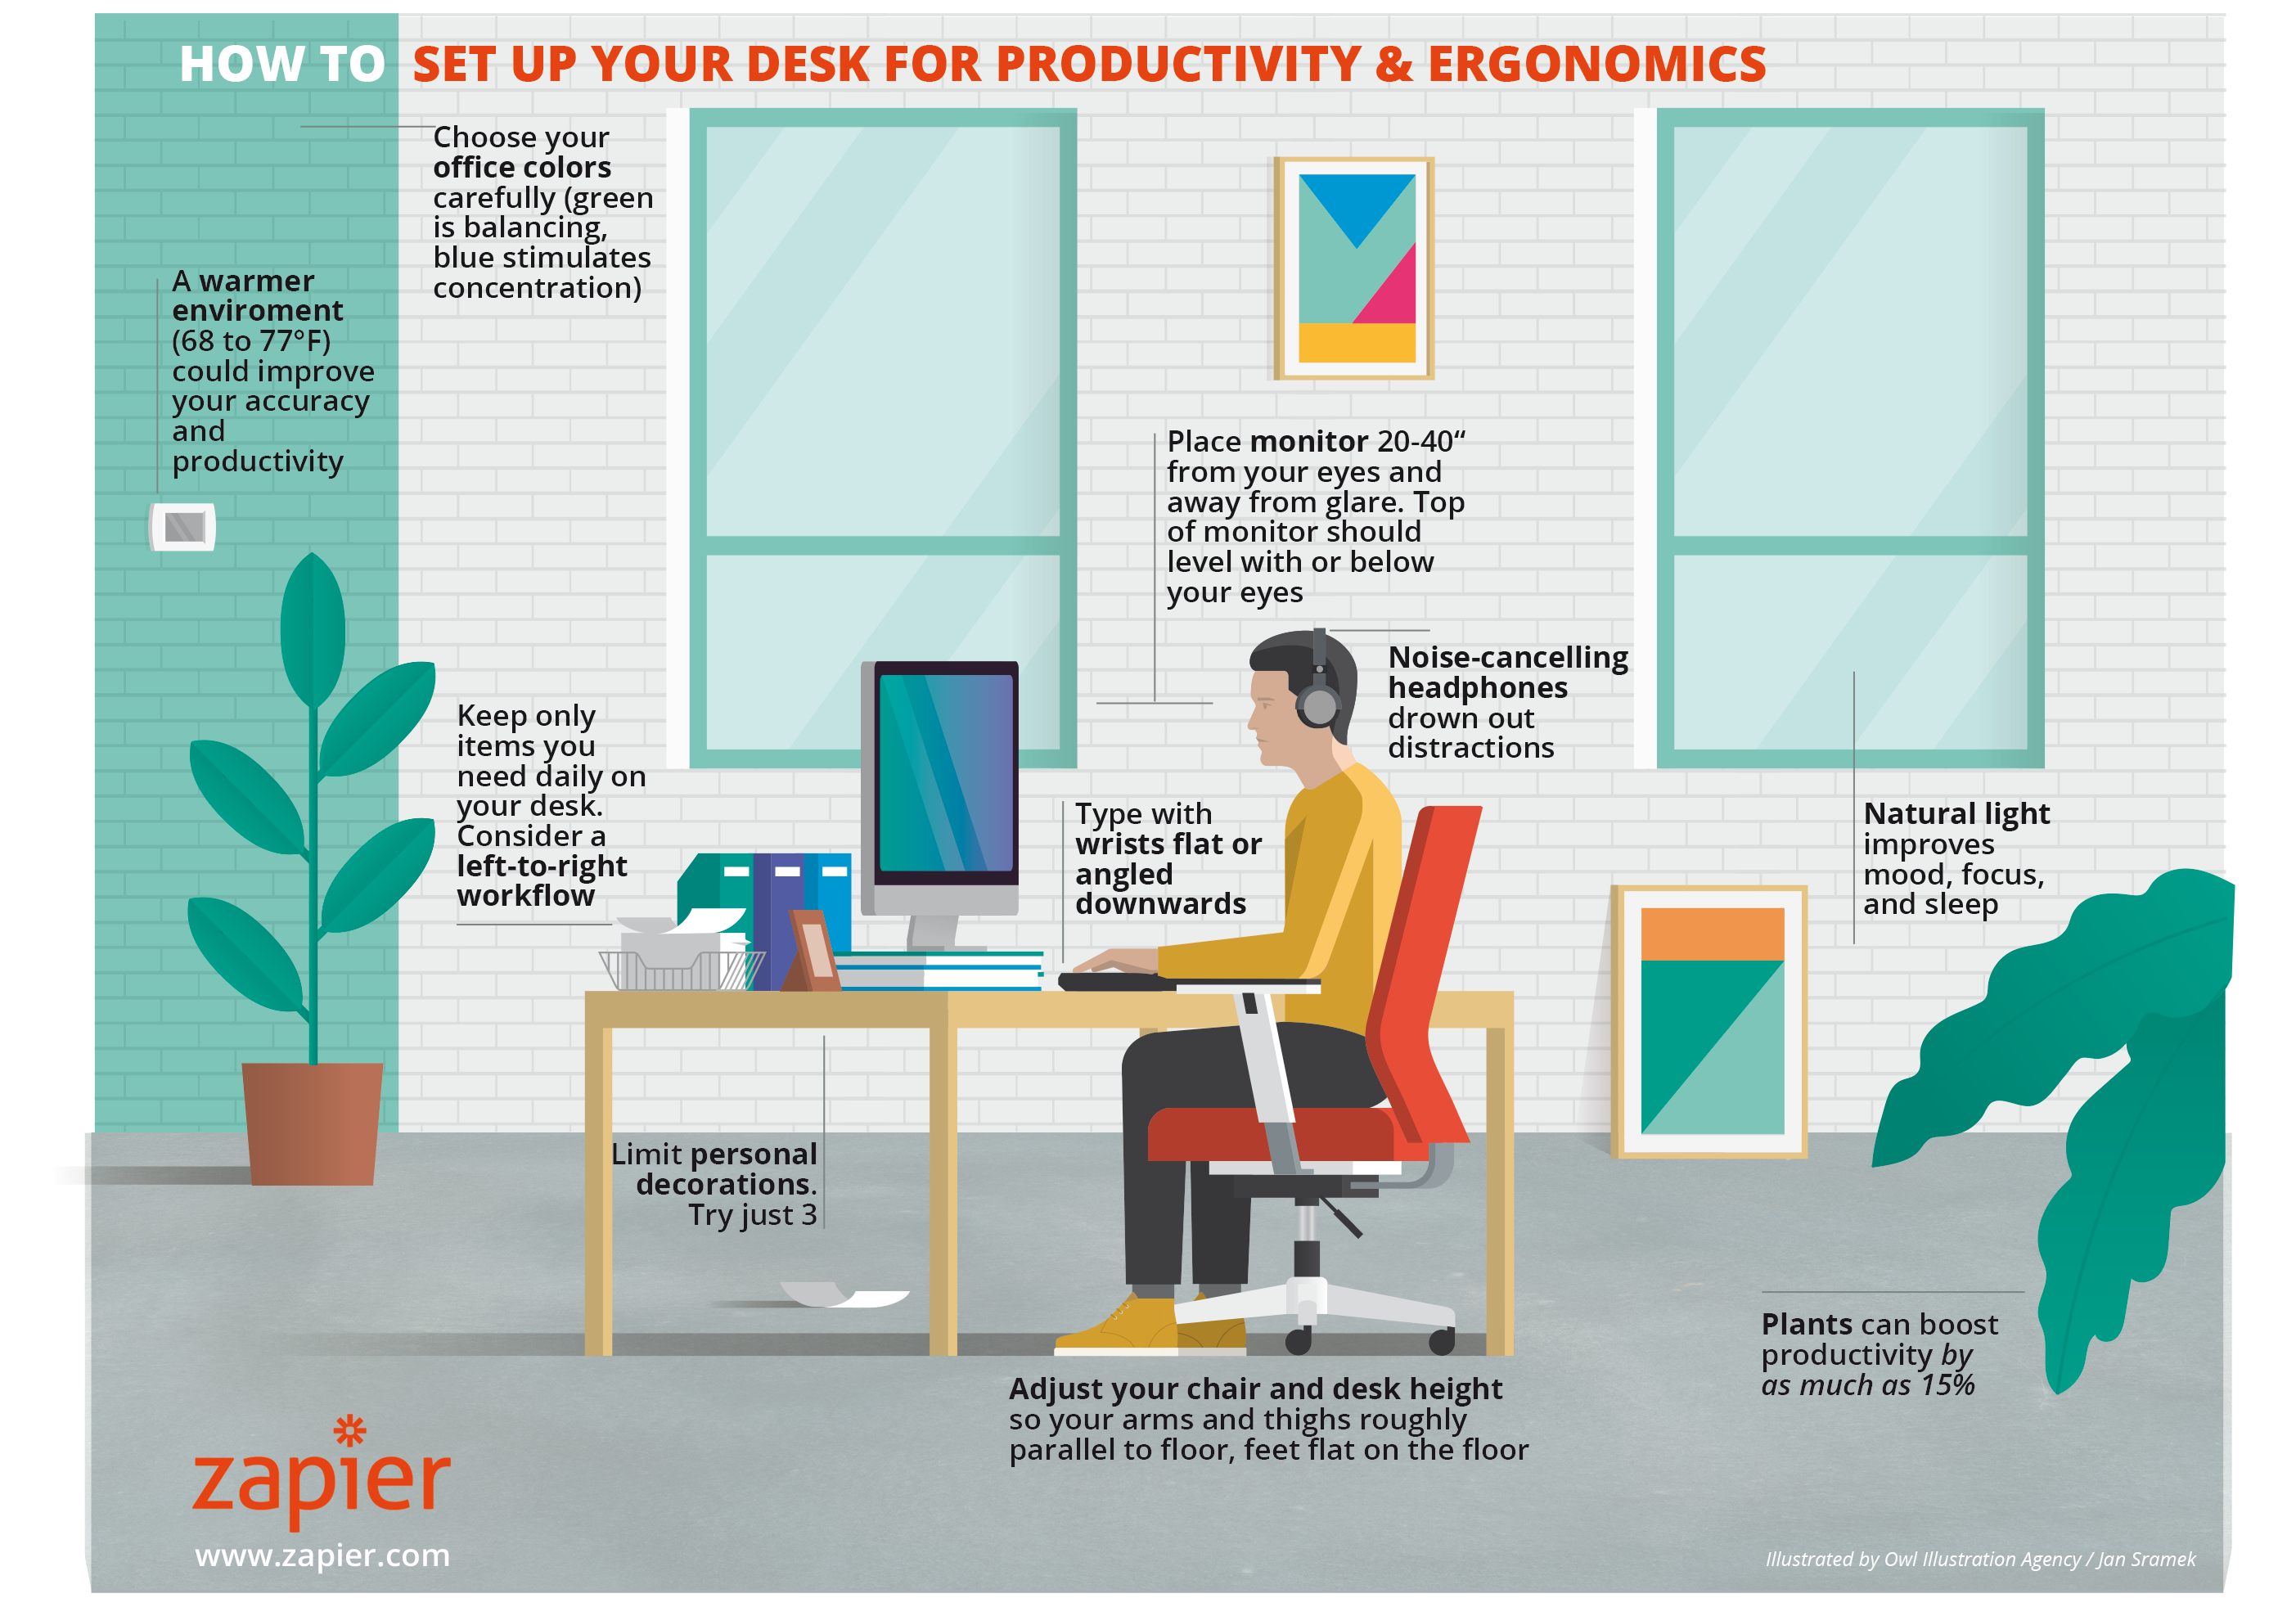 Productivity and Ergonomics: The Best Way to Organize Your Desk